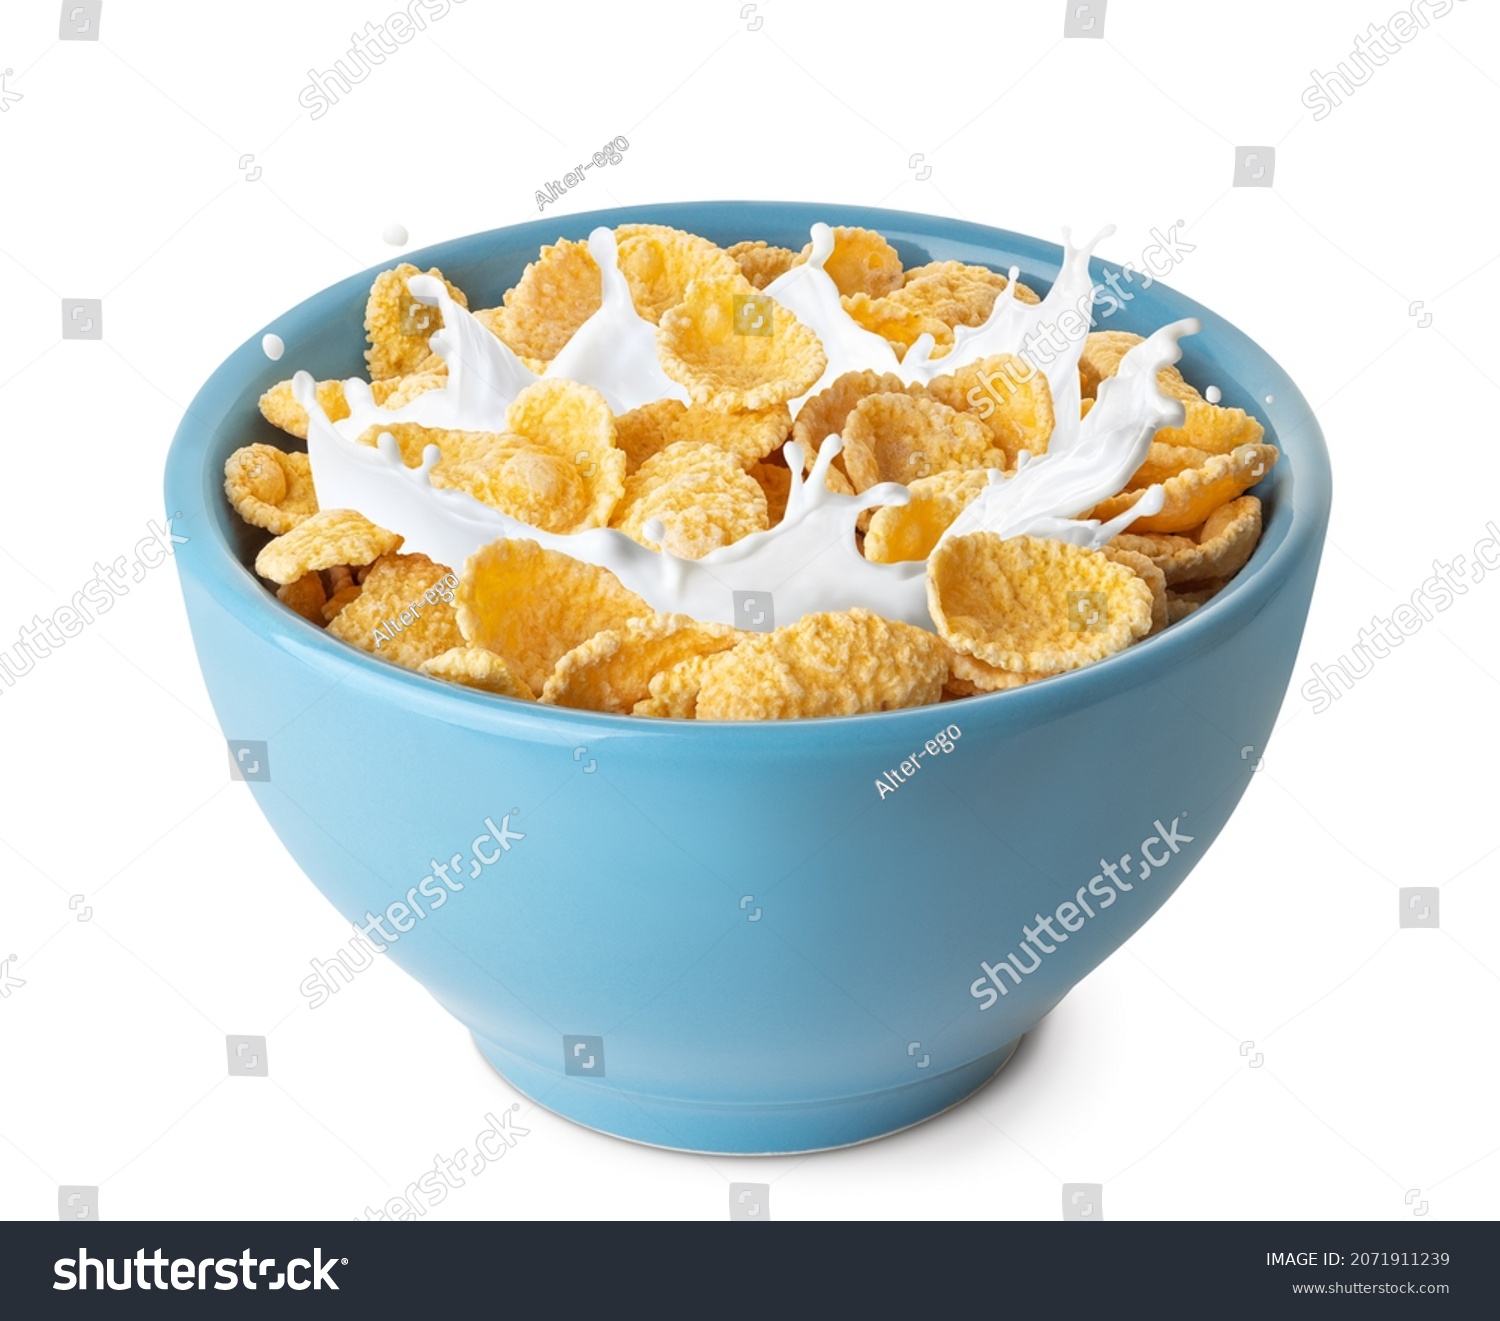 cornflakes in blue bowl. Breakfast cereal with splashing milk isolated on white background #2071911239